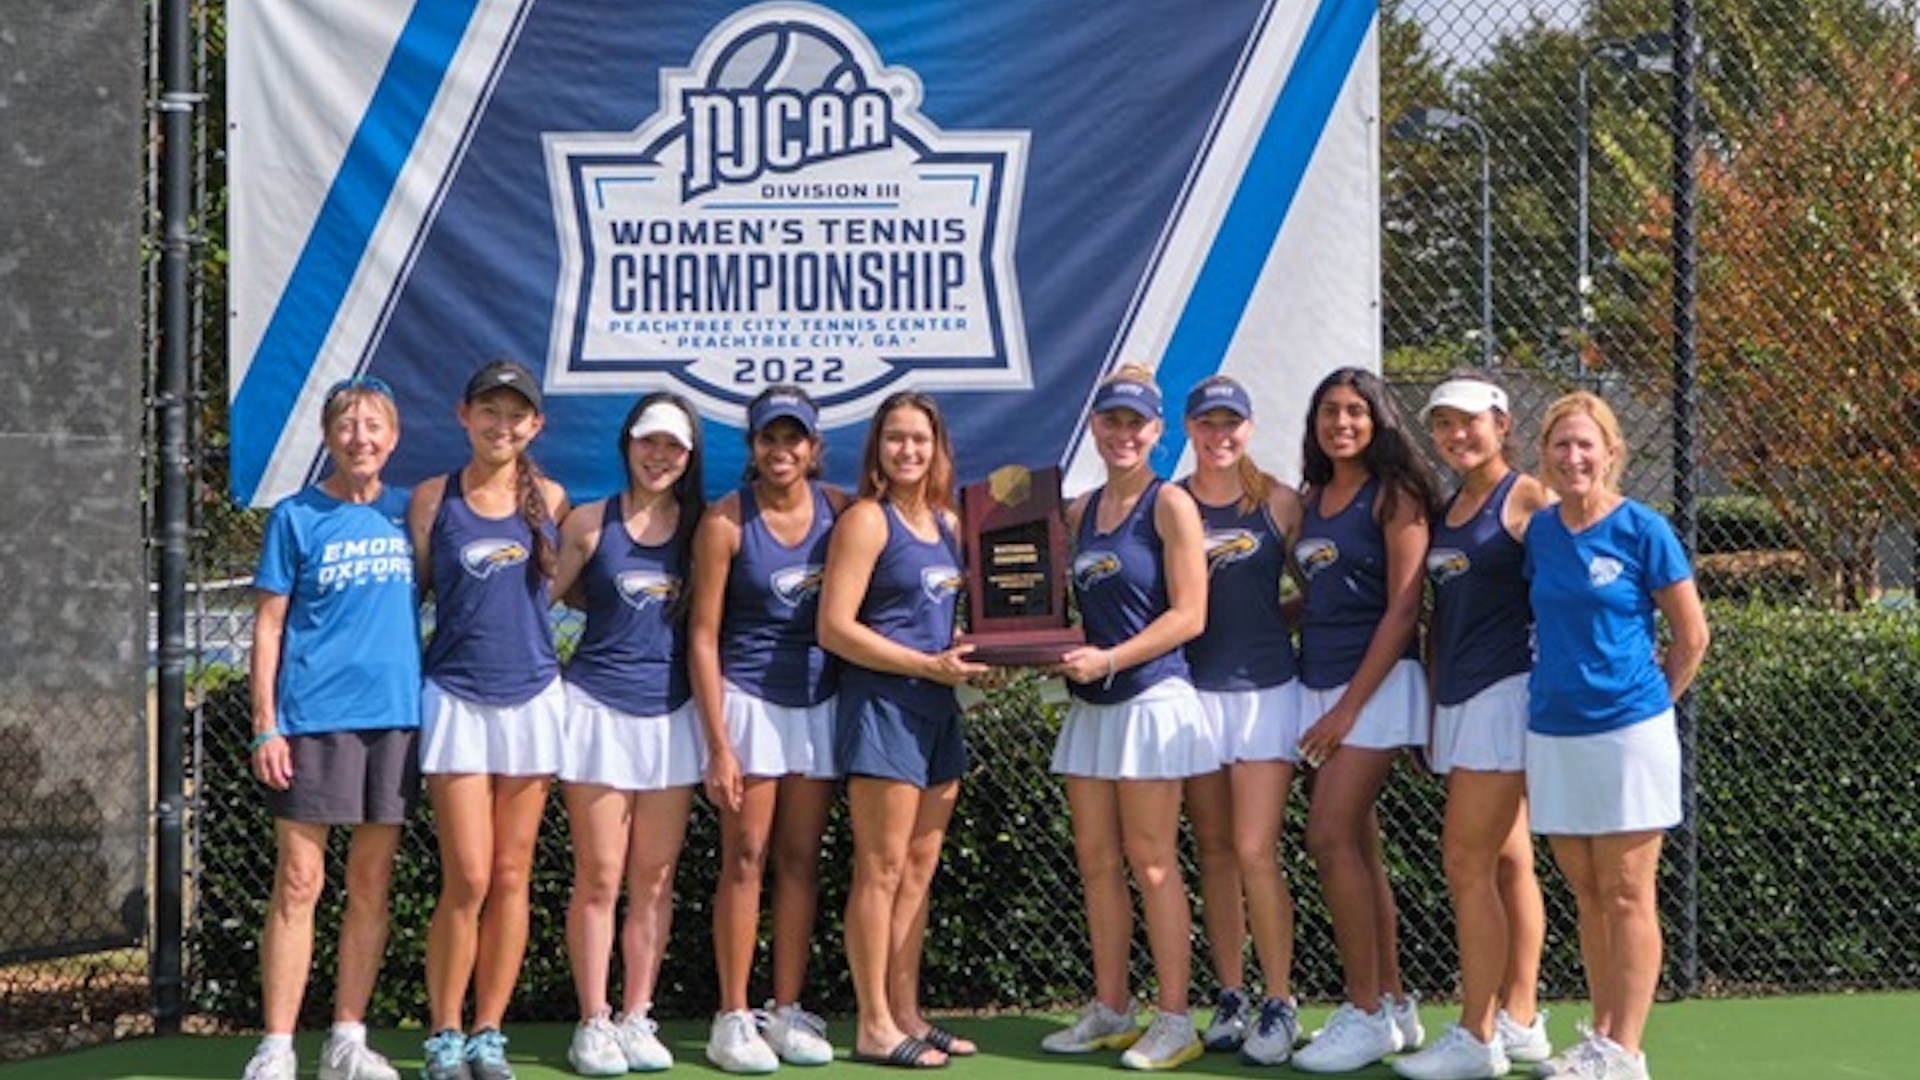 Oxford's Women's Tennis team won its seventh consecutive national championship